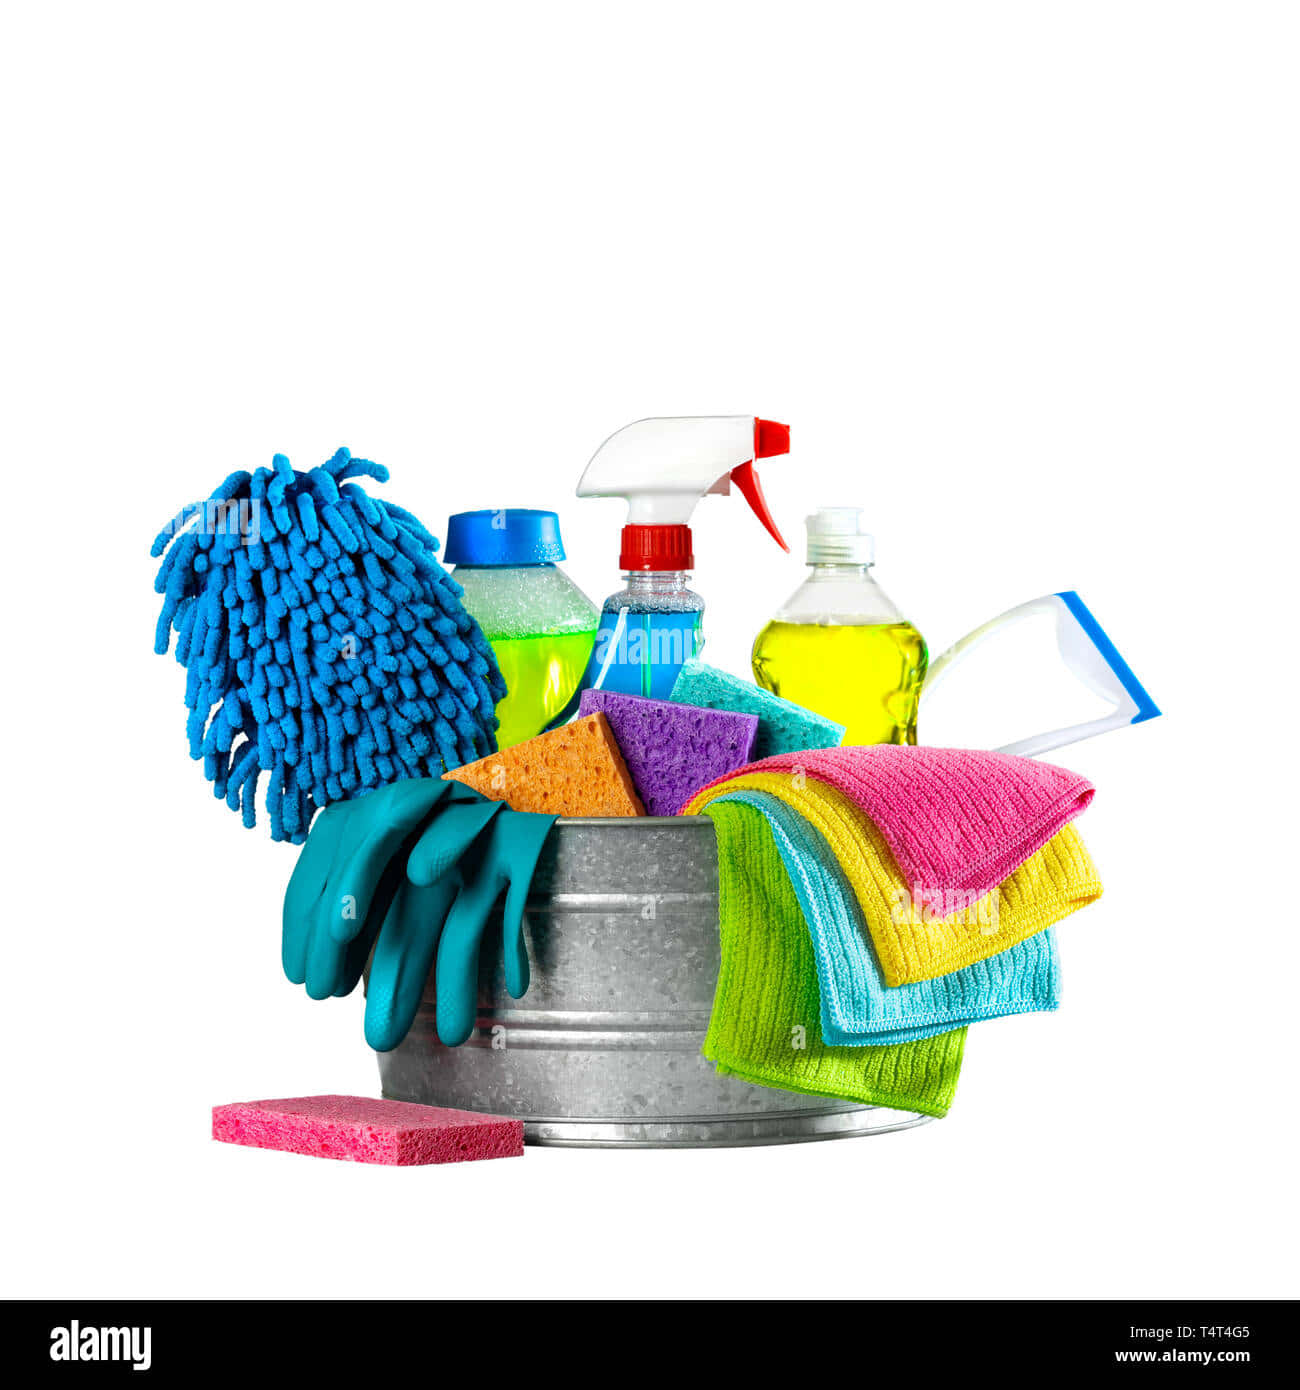 Cleaning Supplies In A Bucket Isolated On White Background - Stock Image